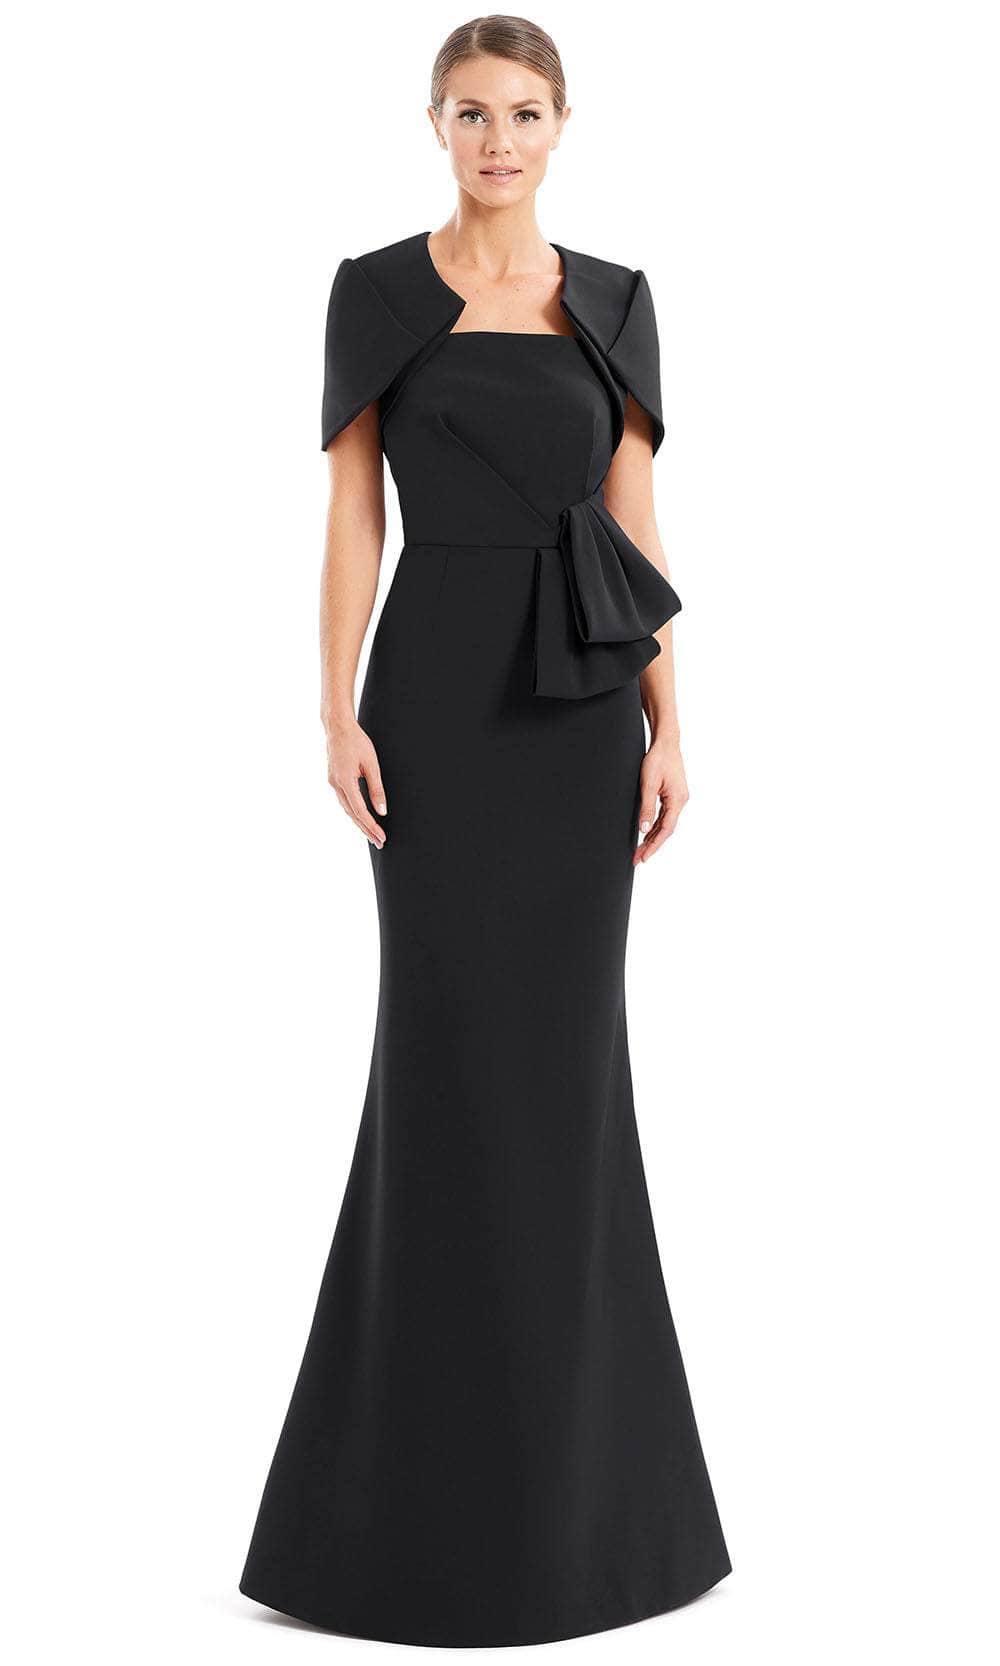 Alexander by Daymor, Alexander by Daymor 1656 - Strapless Peplum Formal Gown With Jacket